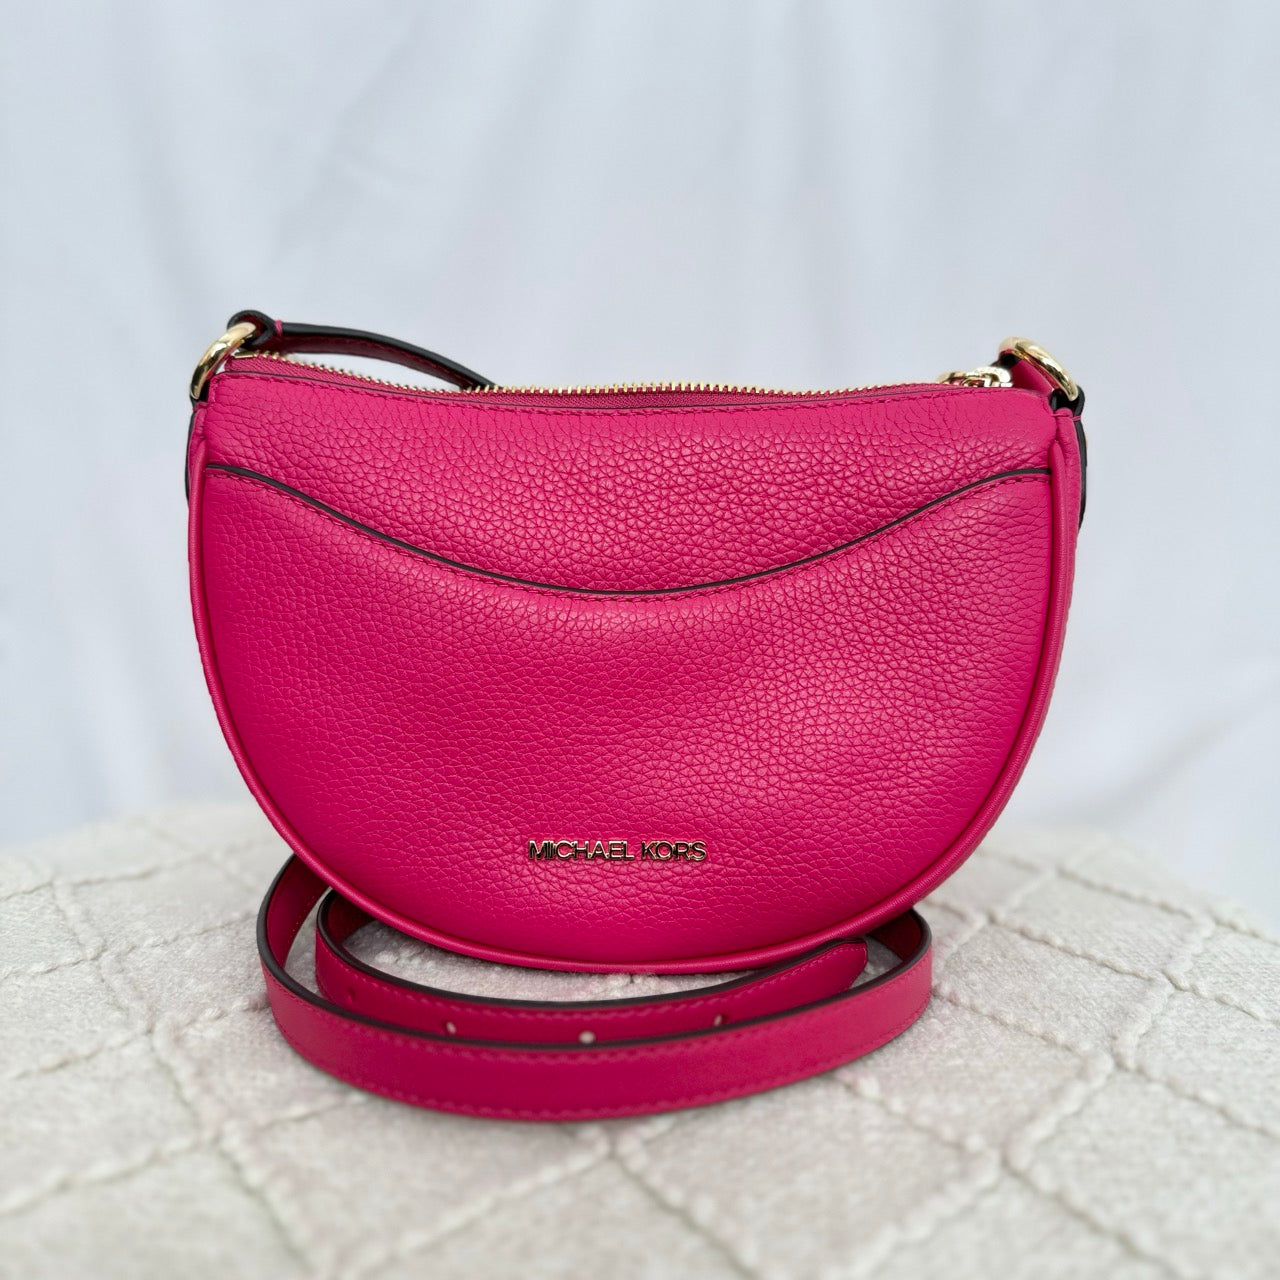 MK Dover Small Half Moon Crossbody in Electric Pink (35R3G4DC5L)